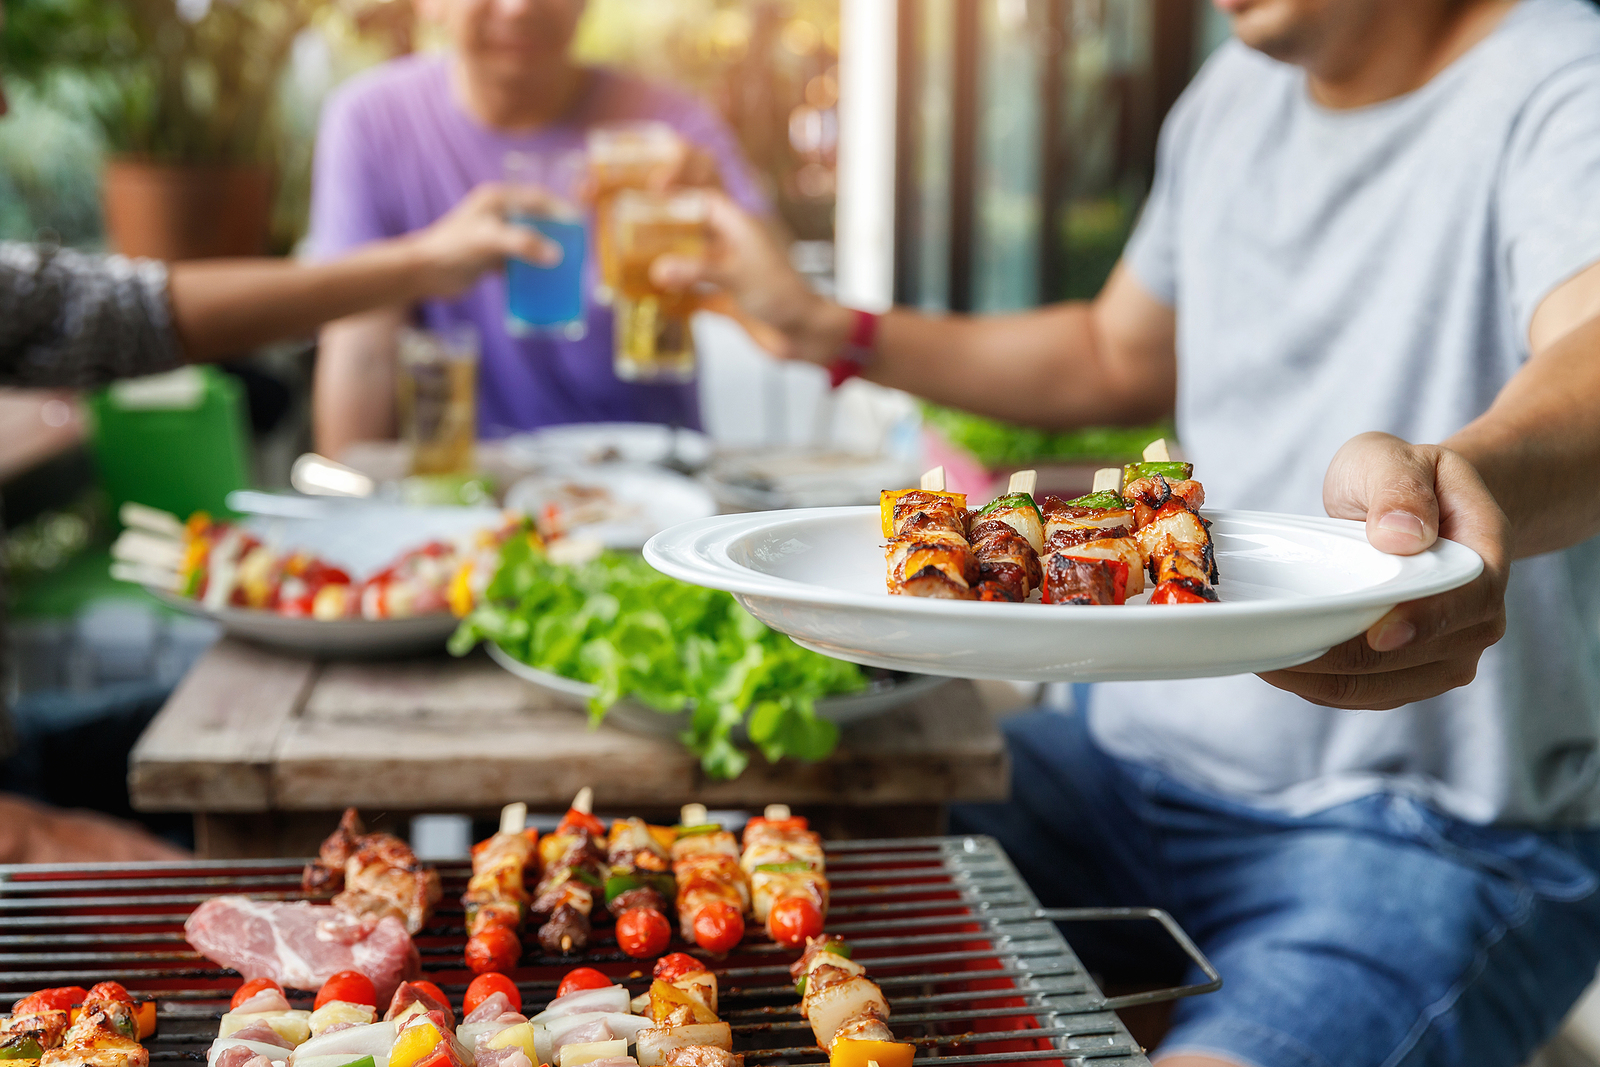 At an outdoor barbecue, a man holds a plate of delicious grilled vegetables and chicken. Wilcox Electric DC 